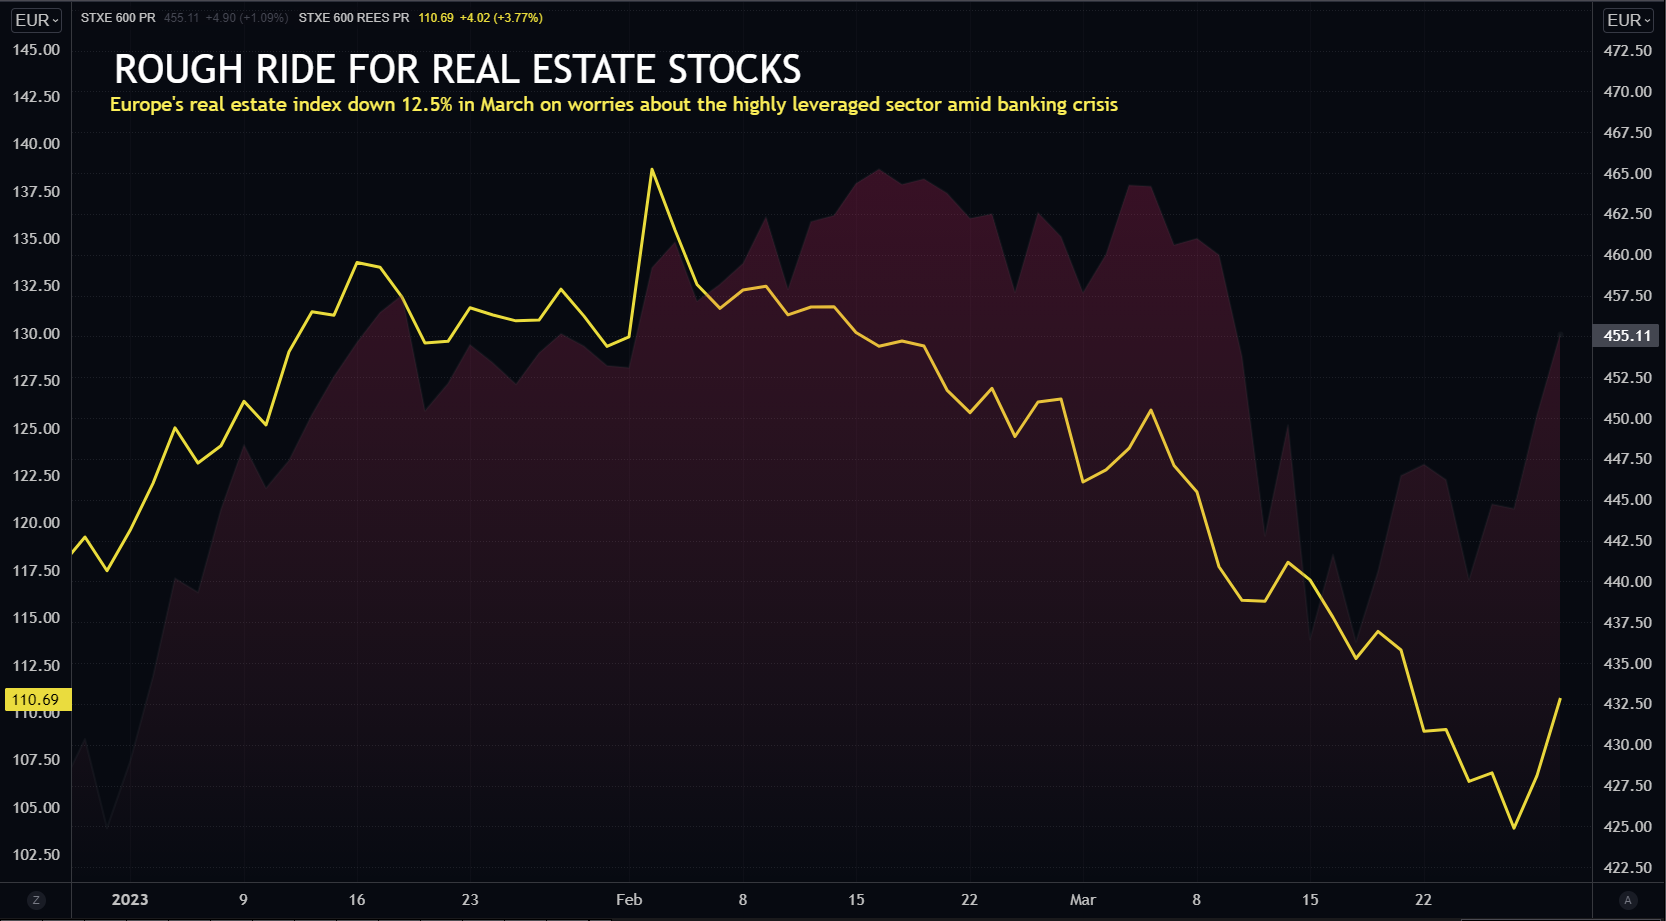 Rough ride for real estate stocks